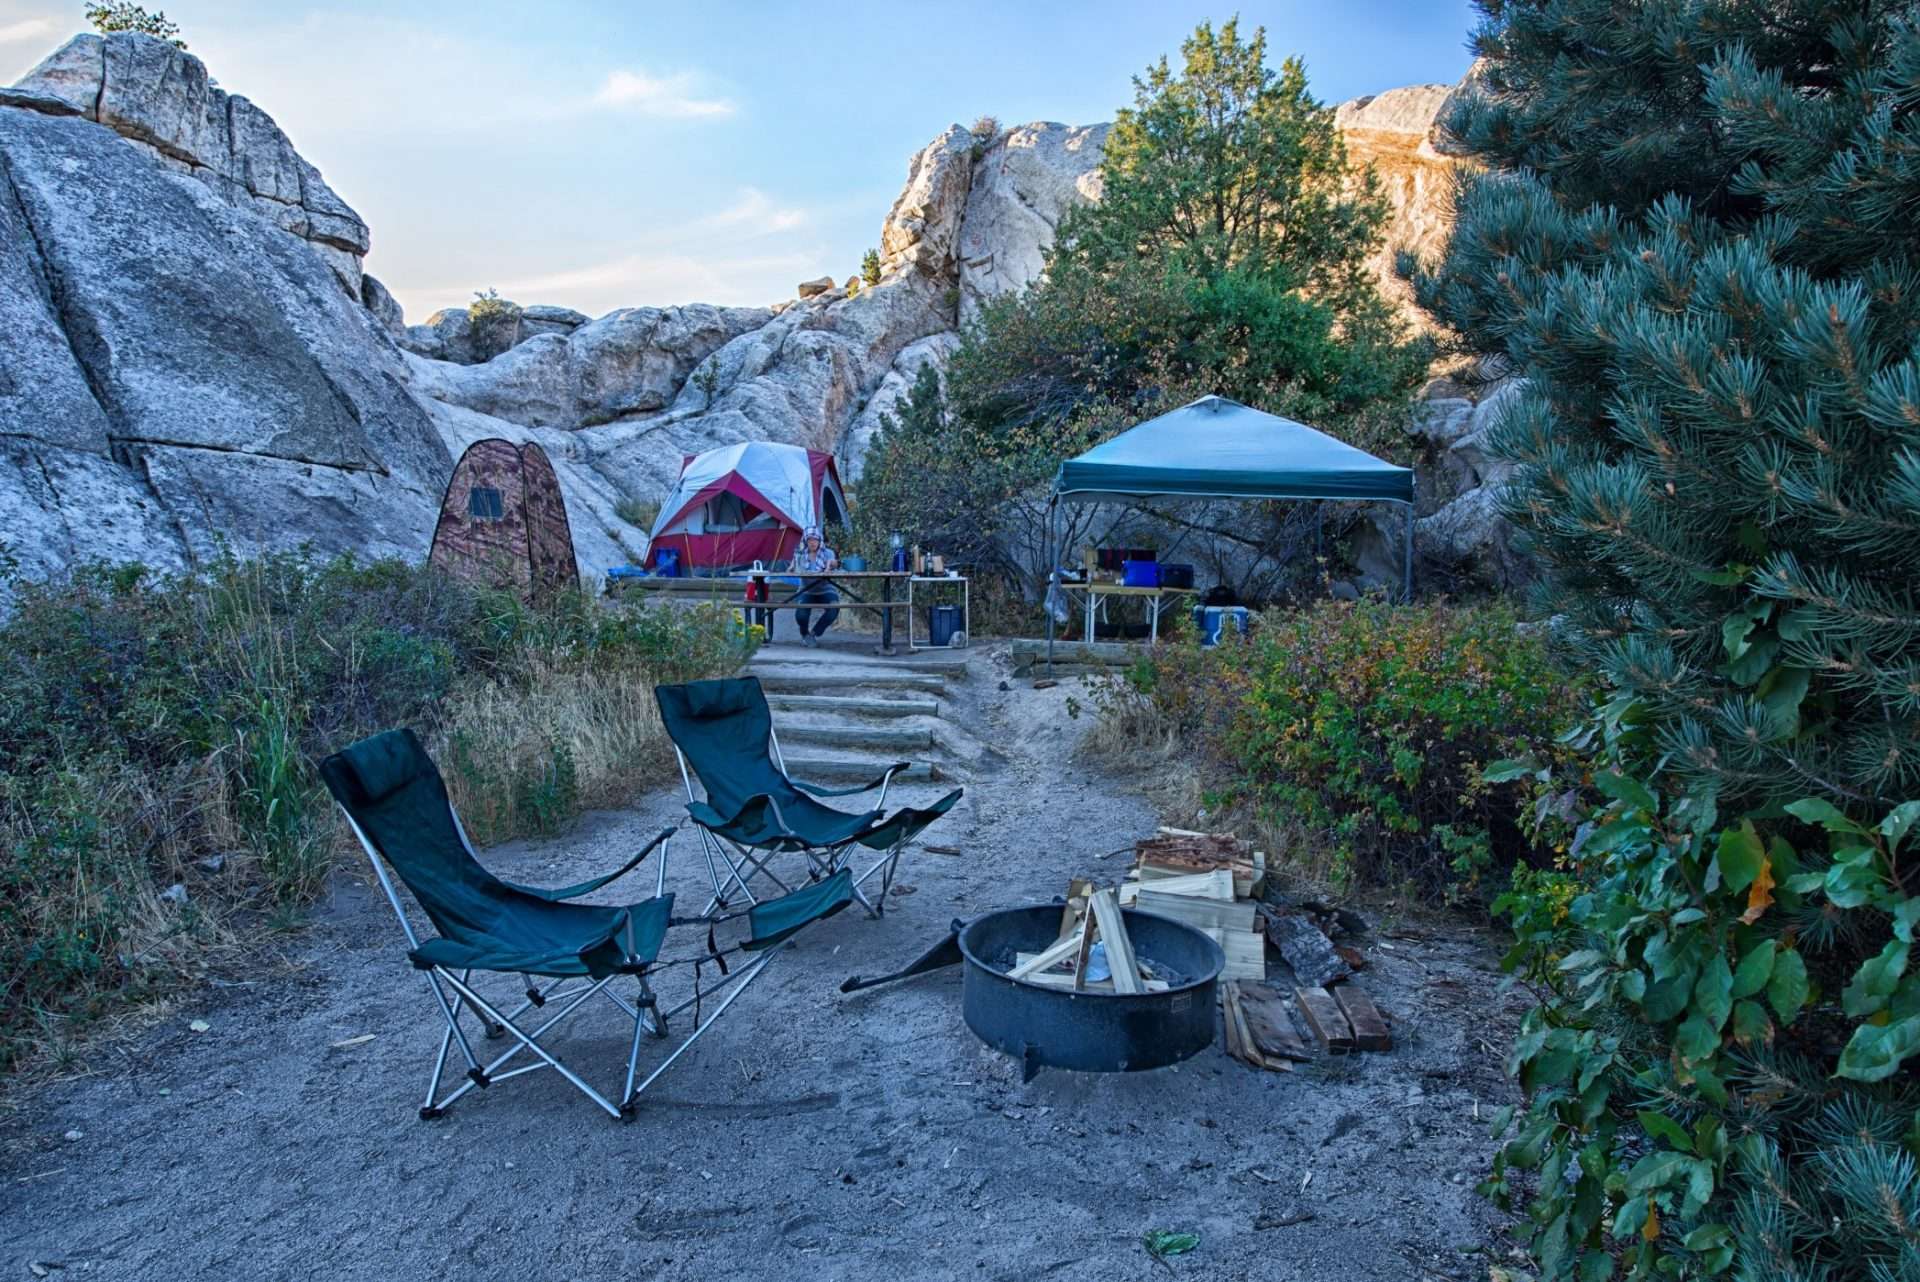 Campground set up with tent, fire pit, and two rocking camp chairs